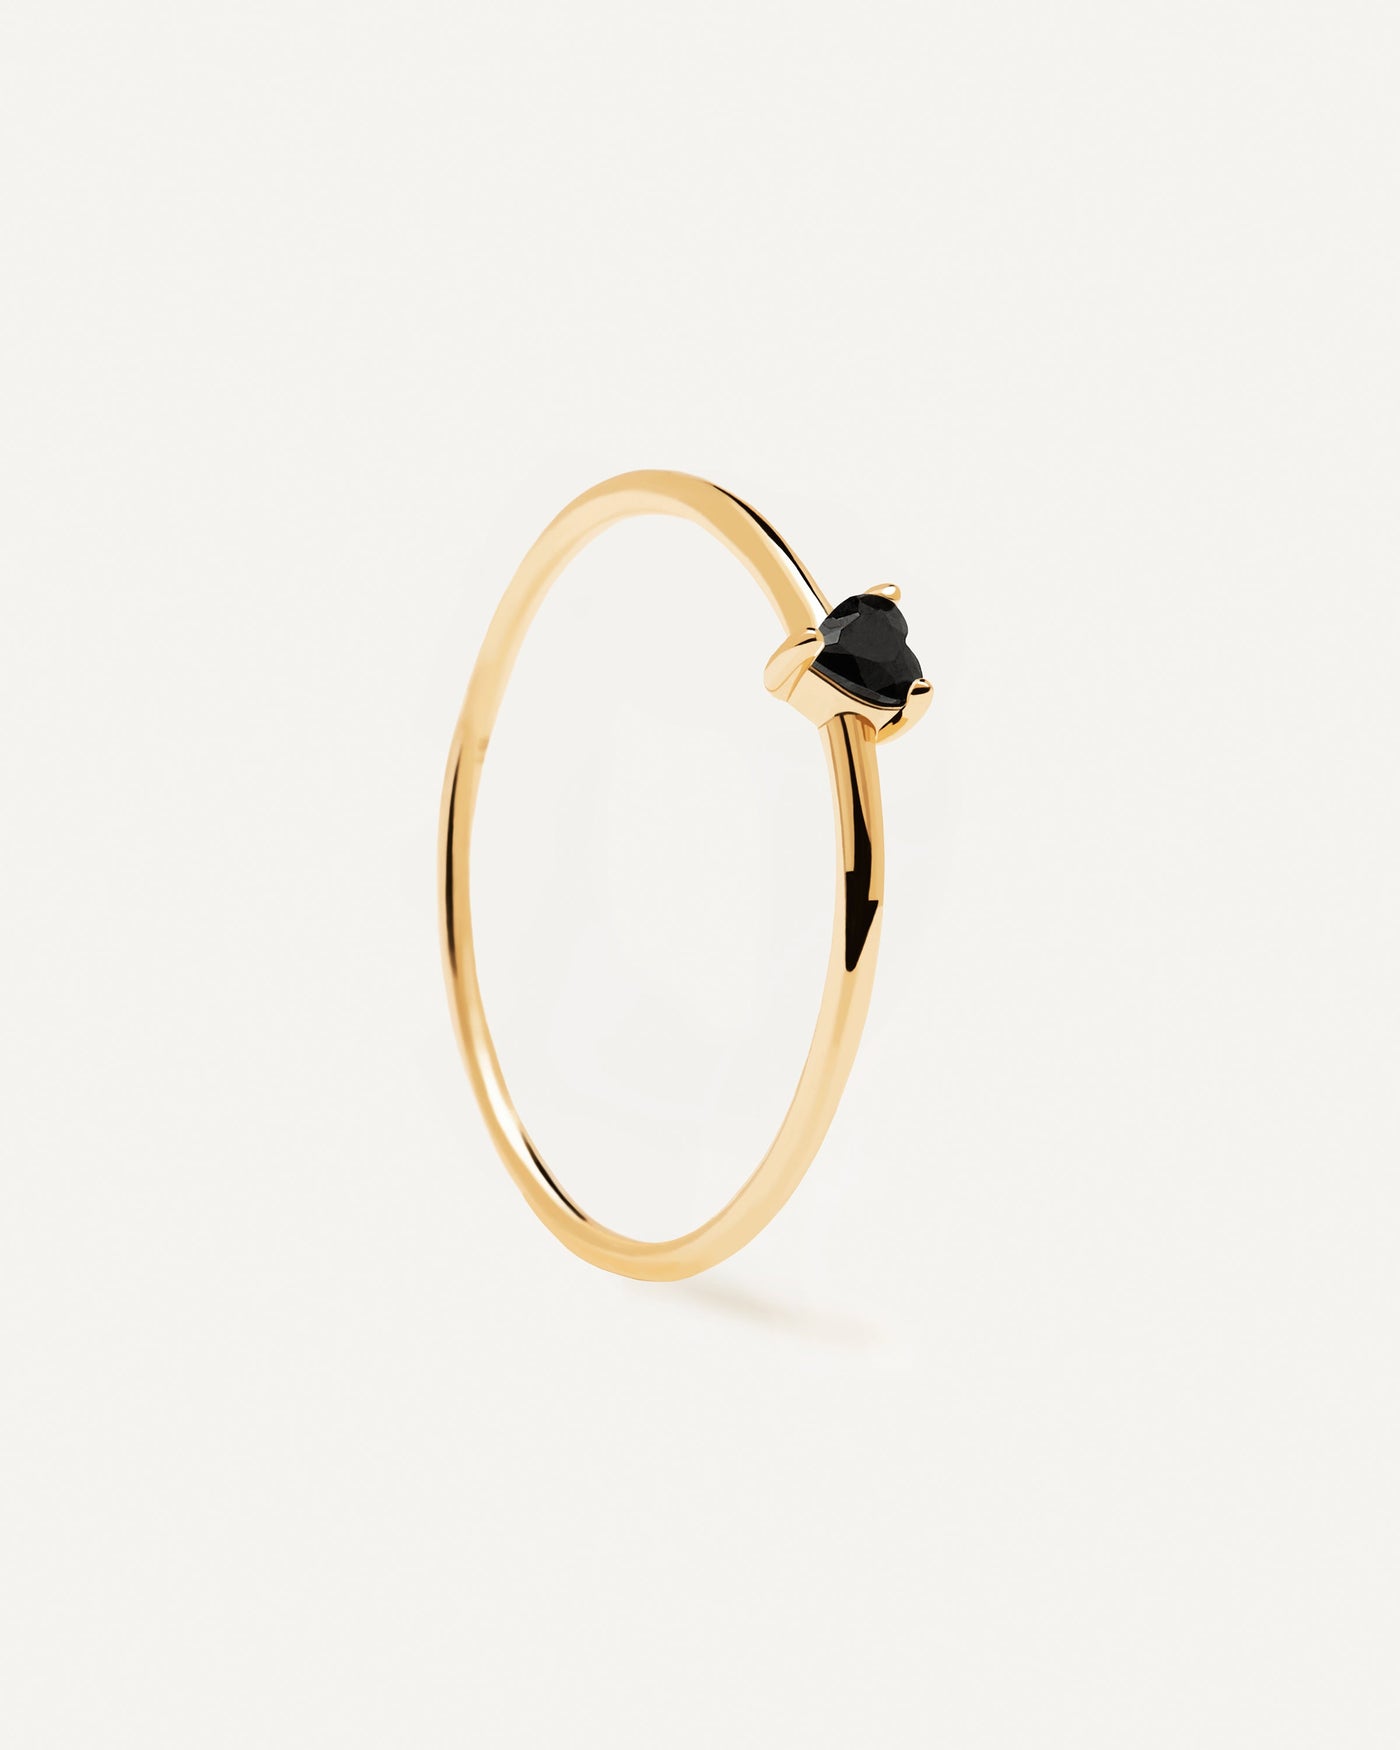 2023 Selection | Black Heart Ring. Heart-shaped black zirconia stone prong-set on a thin 18k gold plated ring. Get the latest arrival from PDPAOLA. Place your order safely and get this Best Seller. Free Shipping.